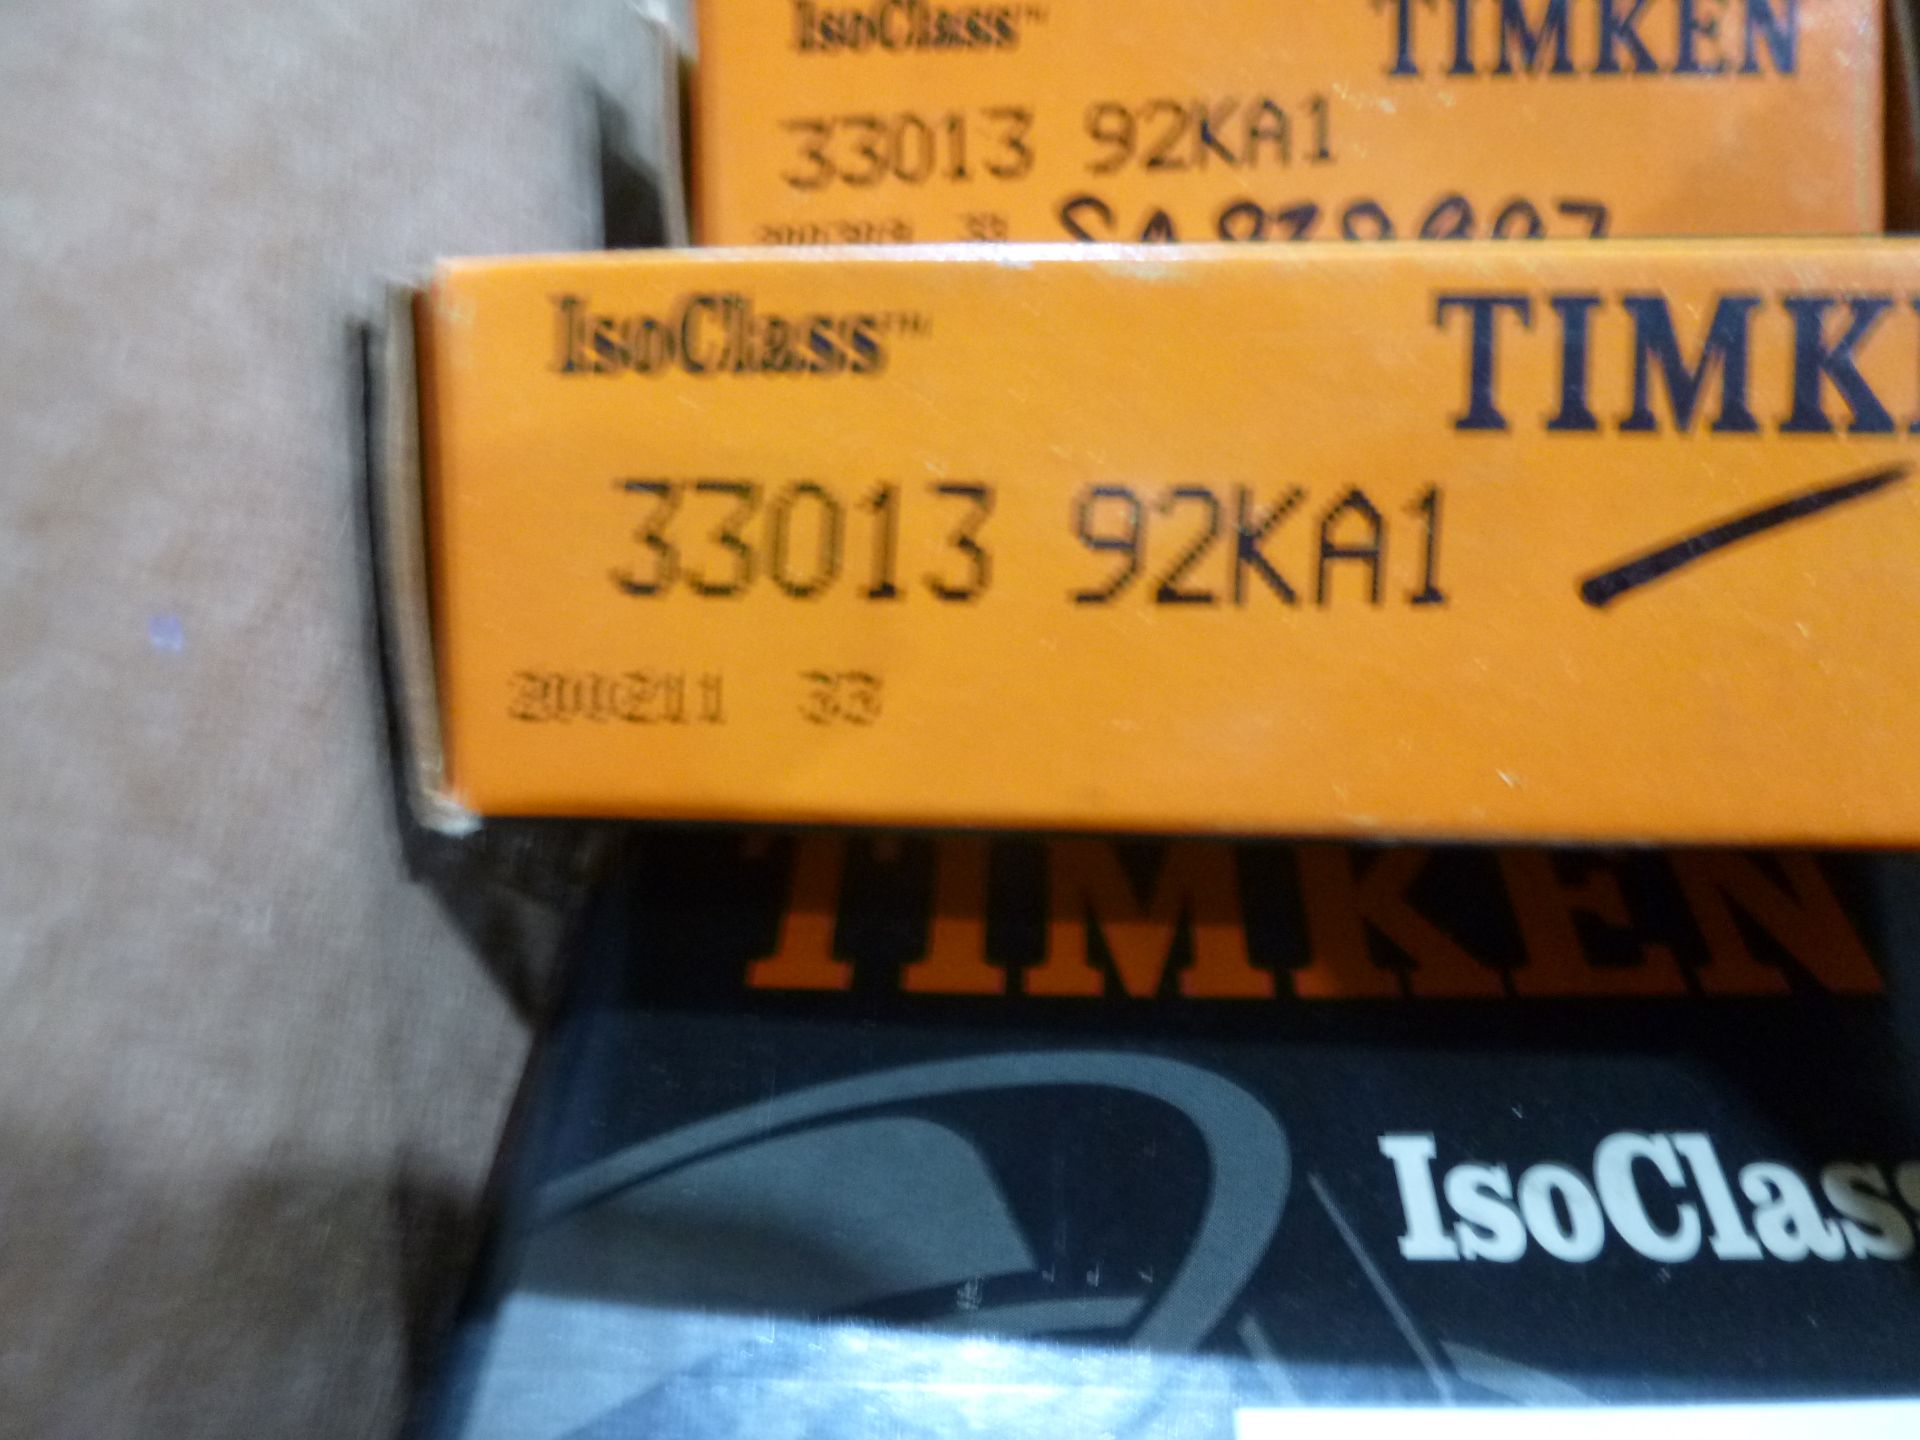 Qty 3 Timken bearing 33013 92KA1, as always with Brolyn LLC auctions, all lots can be picked up from - Image 2 of 2